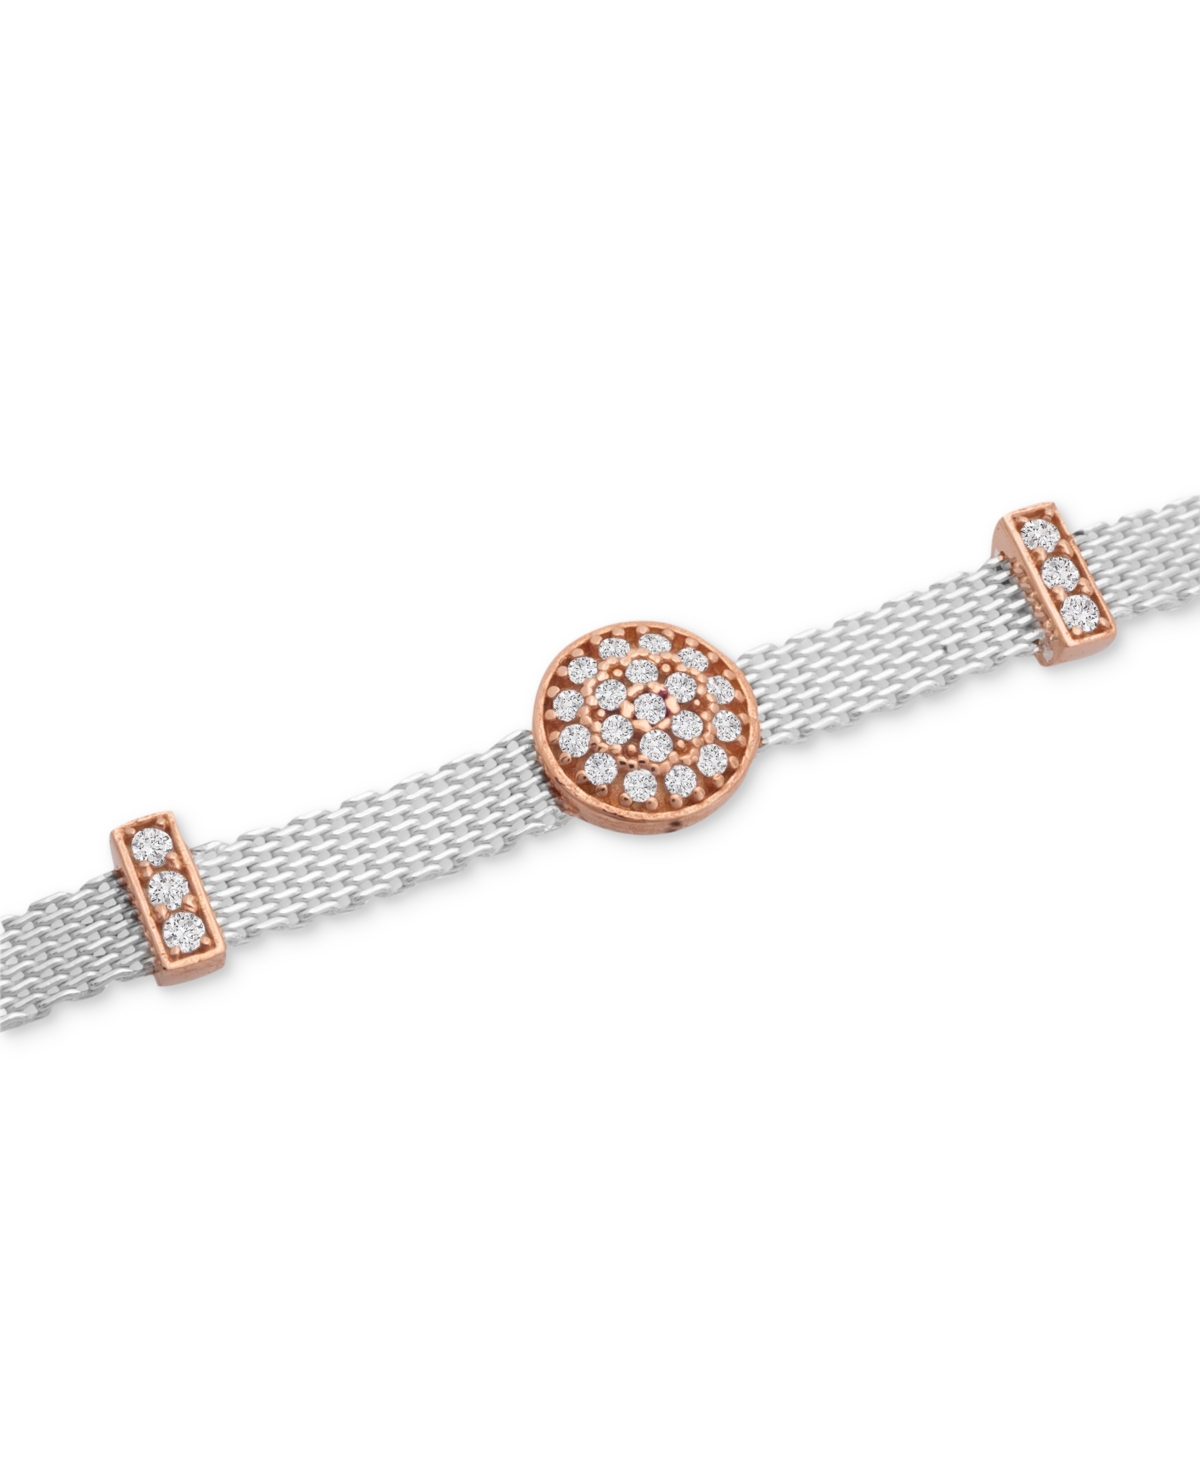 Cubic Zirconia Mini-Cluster Mesh Link Bracelet in Sterling Silver & Rose Gold-Plate - Cubic Zirconia